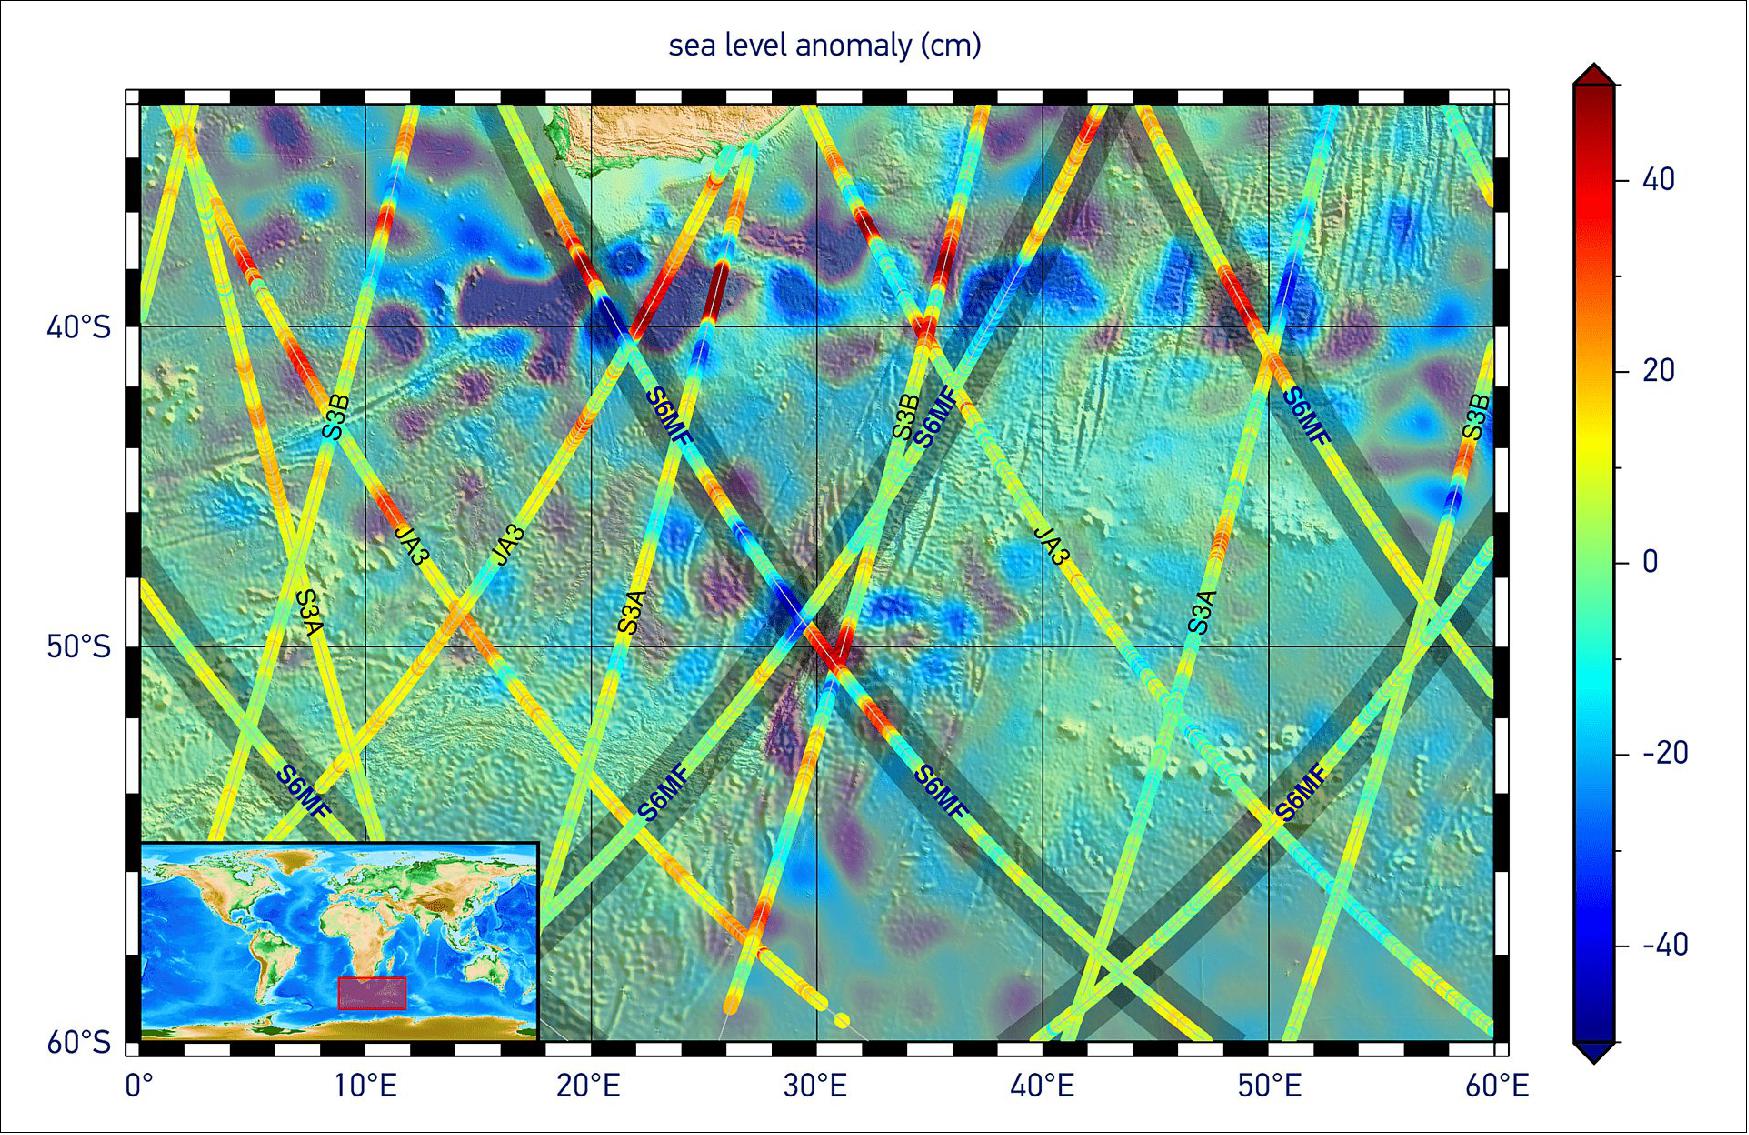 Figure 26: Copernicus Sentinel-6 sea-level anomaly data, overlaid on a map showing similar products from all of the Copernicus altimetry missions: Jason-3, Sentinel-3A and Sentinel-3B. The background image is a map of sea-level anomalies from satellite altimeter data provided by the Copernicus Marine Environment Monitoring Service for 4 December 2020. The data for this image were taken from the Sentinel-6 'Short Time Critical Level 2 Low Resolution' products generated on 5 December (image credit: ESA, the image contains modified Copernicus Sentinel data (2020), processed by EUMETSAT)